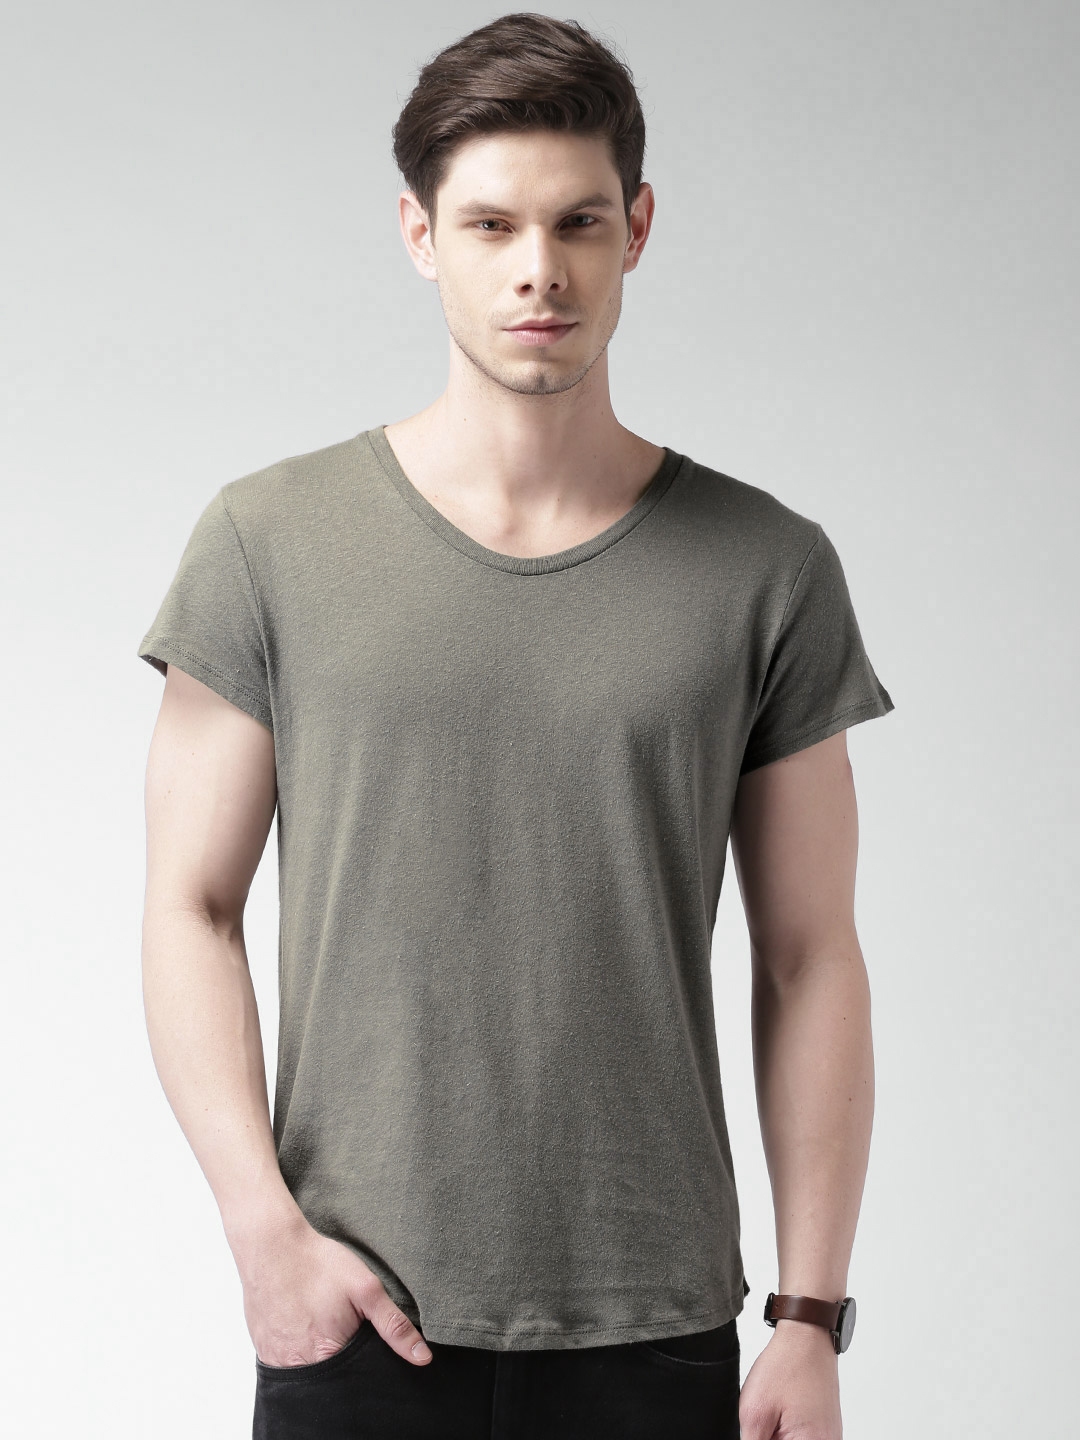 Buy SELECTED Homme Identity Grey T Shirt - Tshirts for Men 1428903 | Myntra